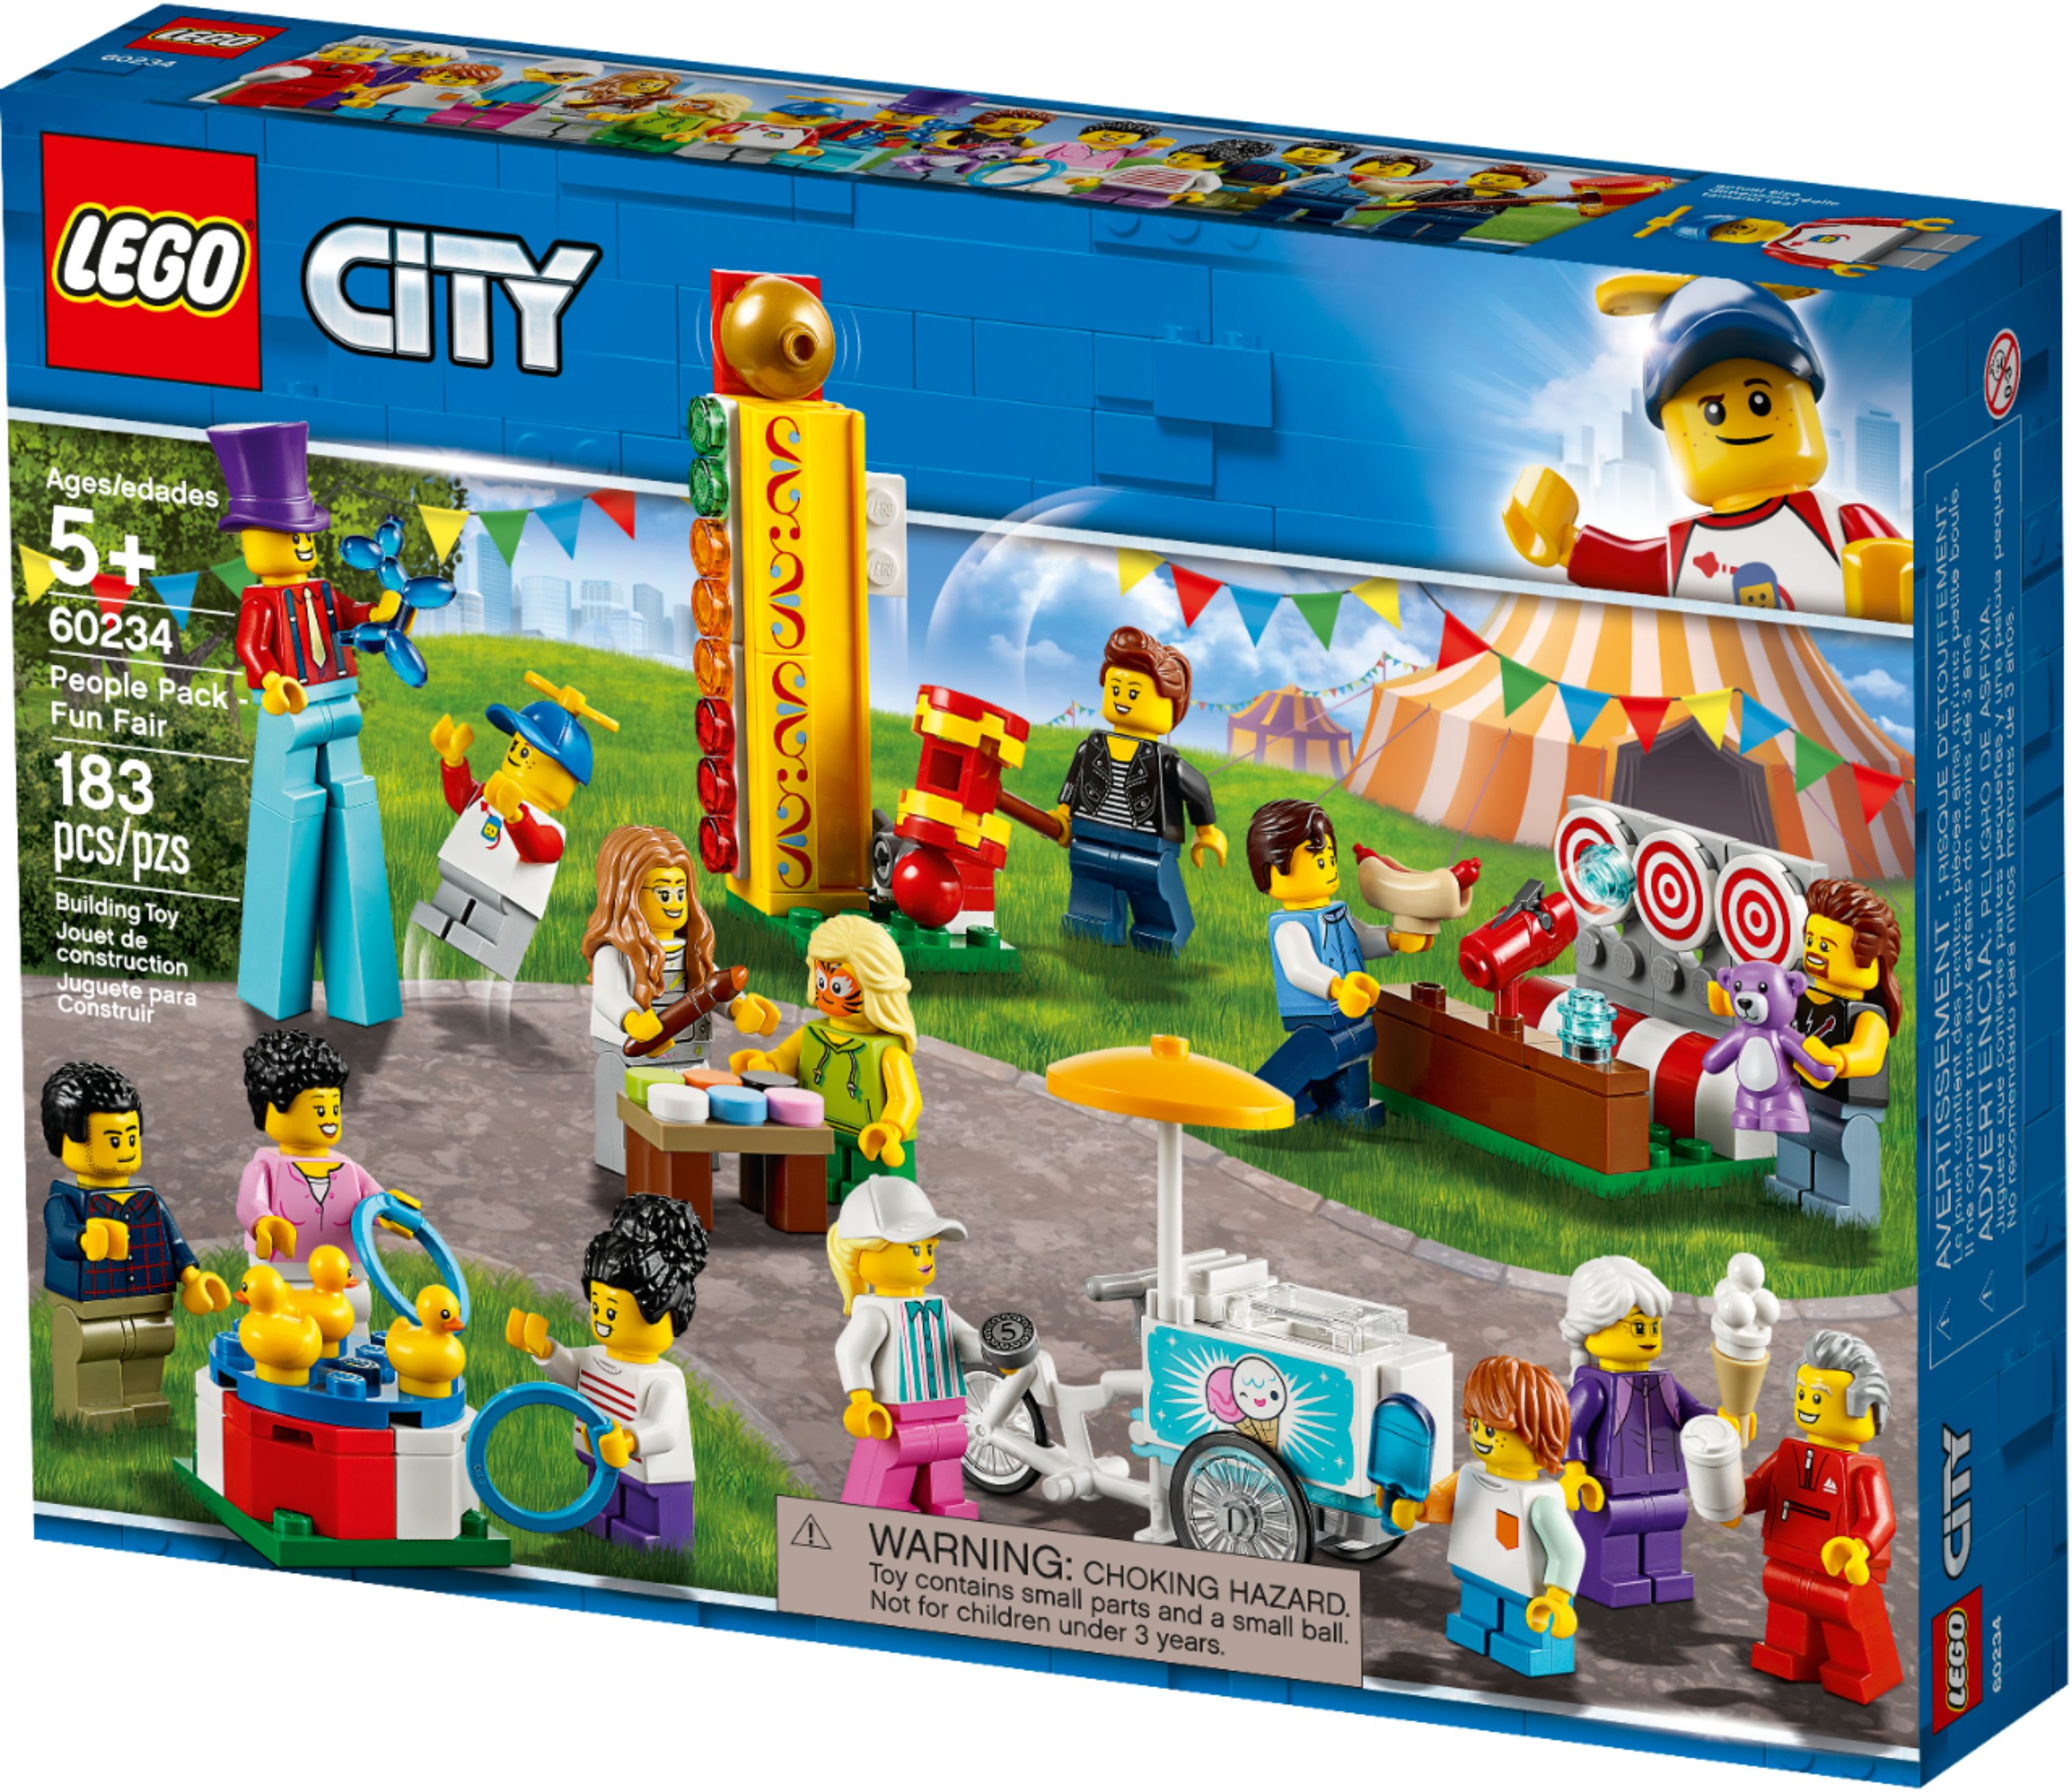 Fun Fair for sale online 60234 LEGO City: People Pack 